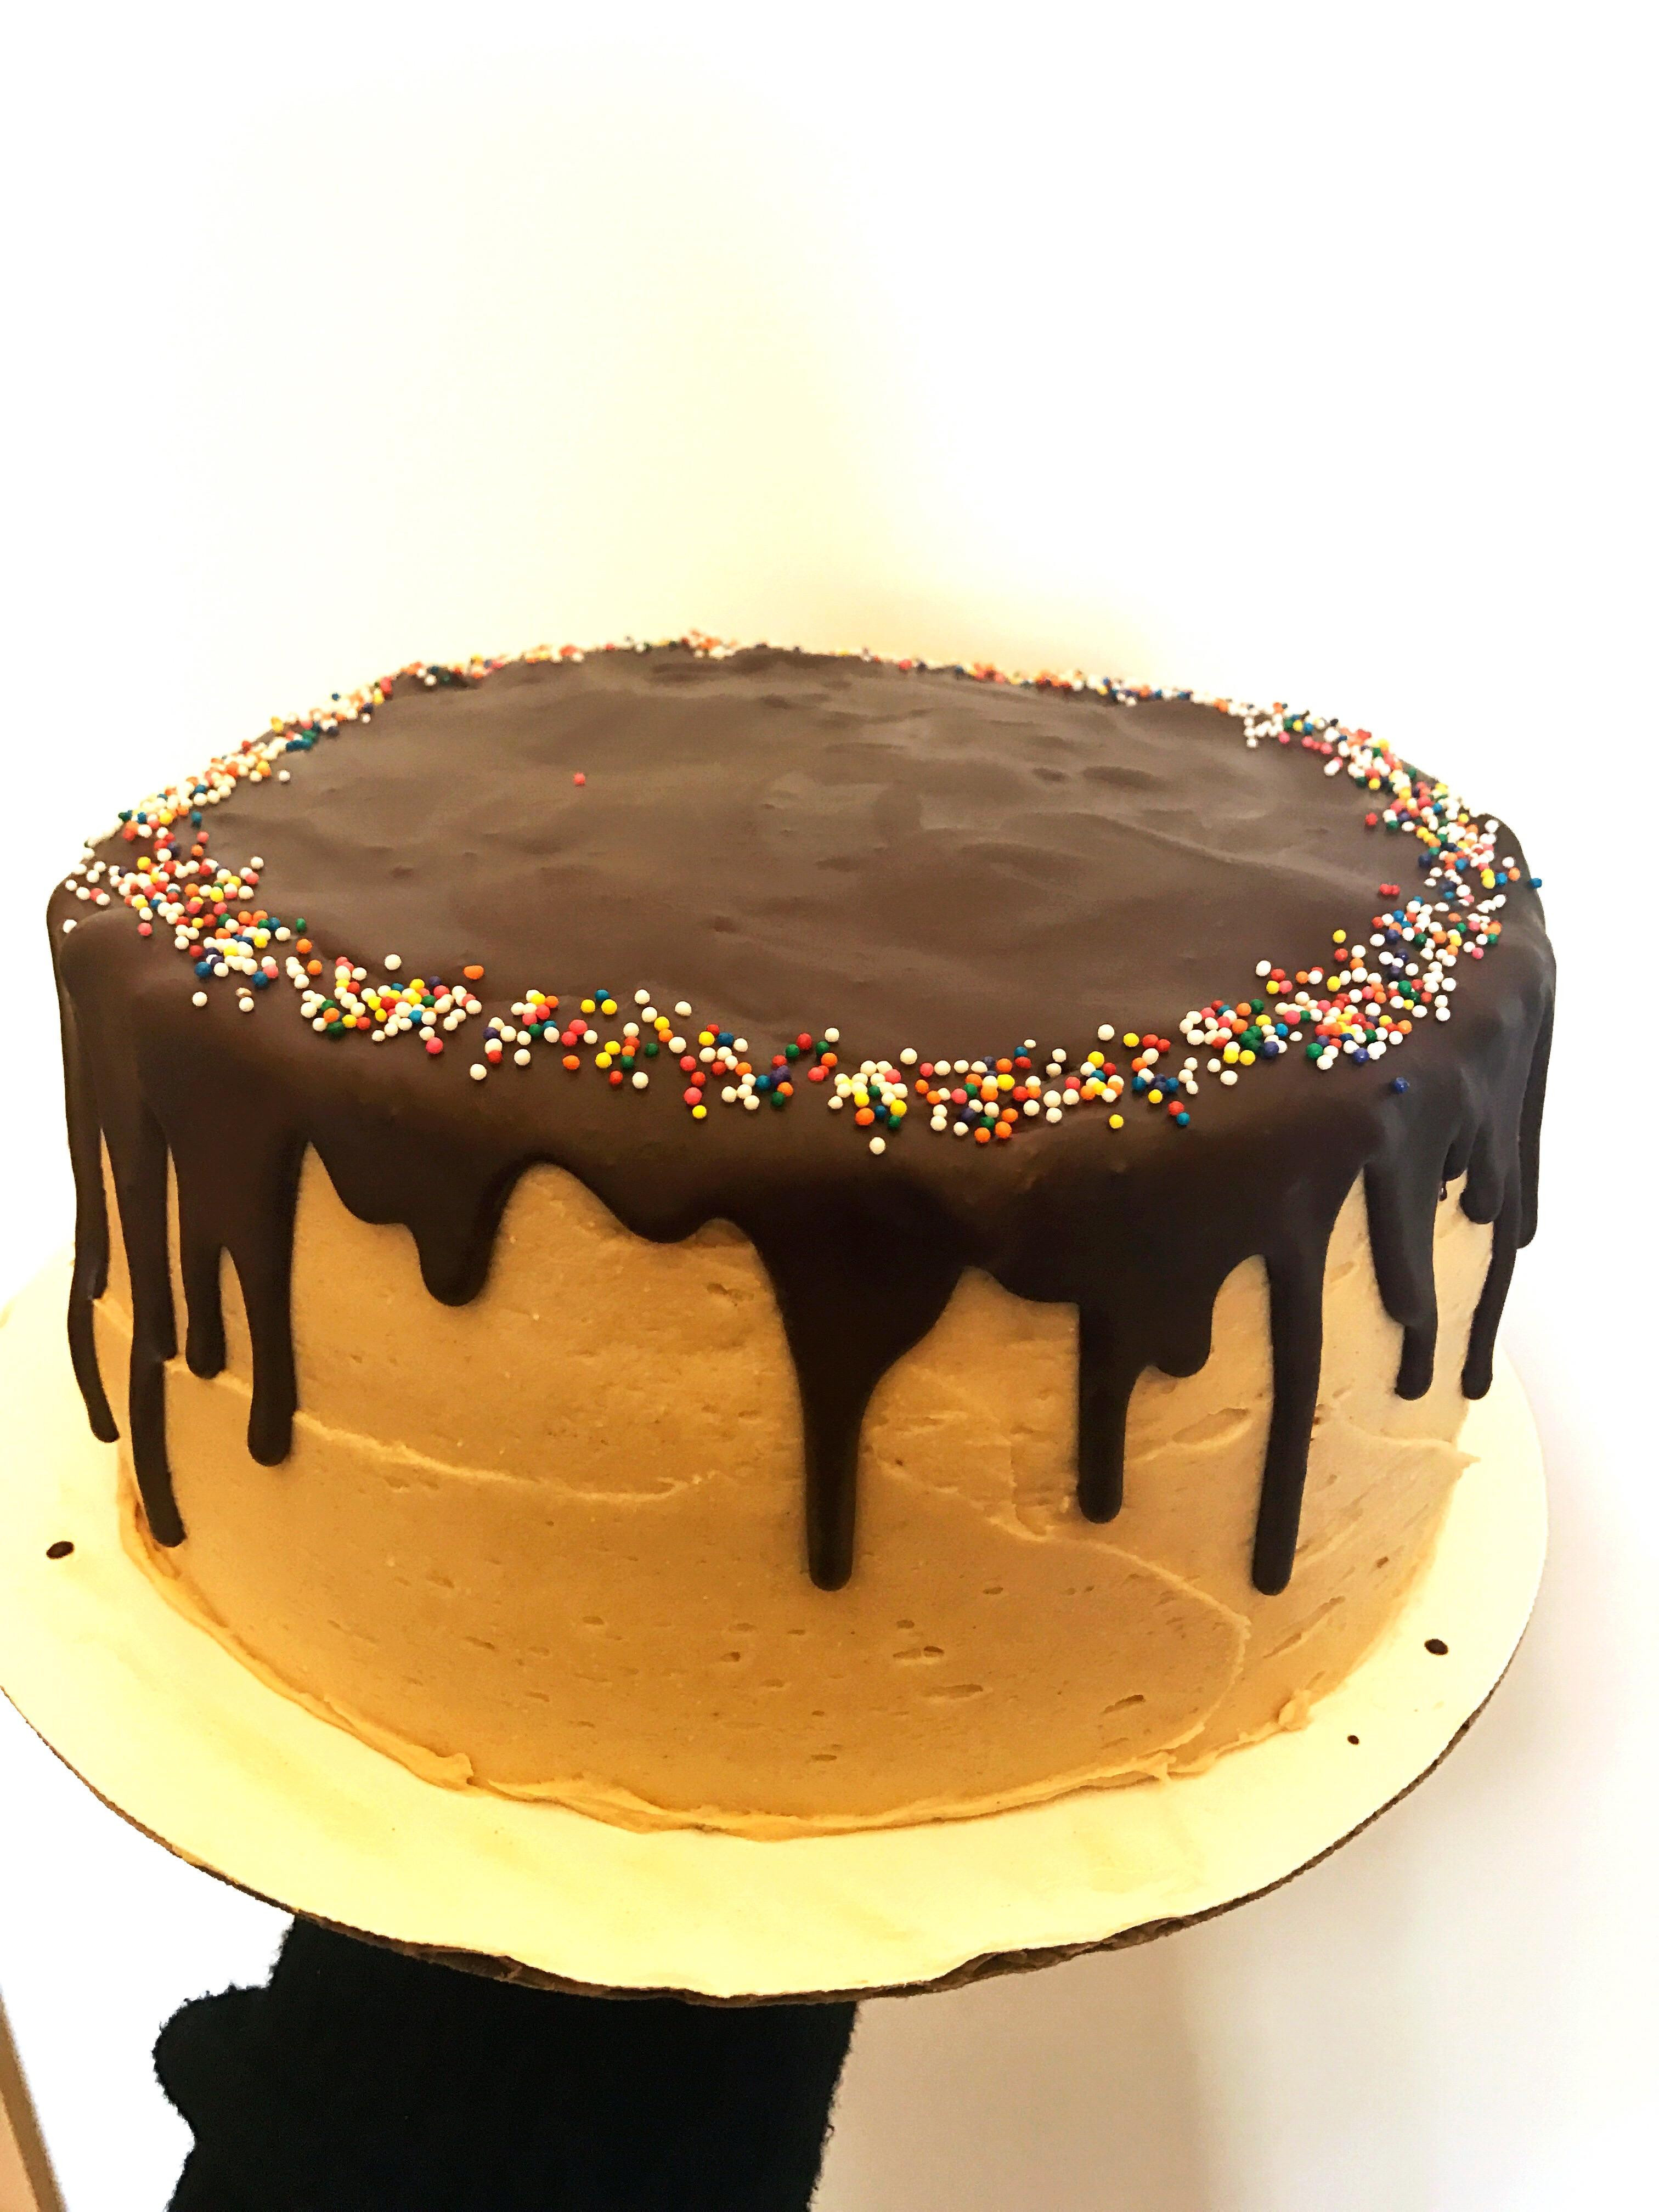 Best ideas about Peanut Butter Birthday Cake
. Save or Pin Chocolate & Peanut Butter Birthday Cake ketorecipes Now.